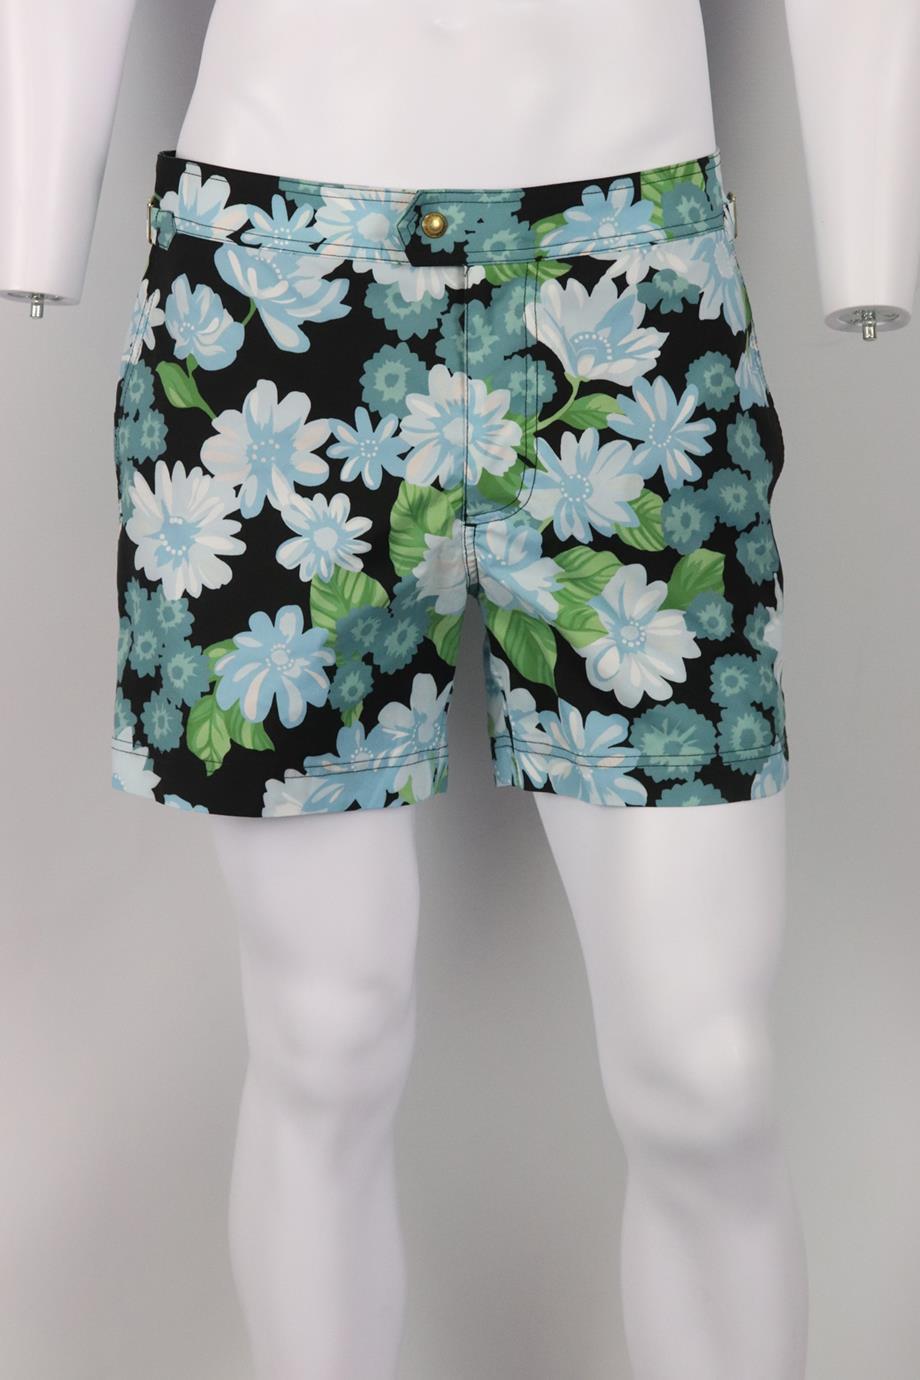 Tom Ford men's floral print shell swim shorts. Blue, green, white and black. Hook, eye and zip fastening at front. 100% Polyester. Size: IT 48 (Medium, UK/US Waist 32). Waist: 33.6 in. Hips: 41 in. Length: 16 in. Inseam: 4.9 in. Rise: 10.6 in. Very